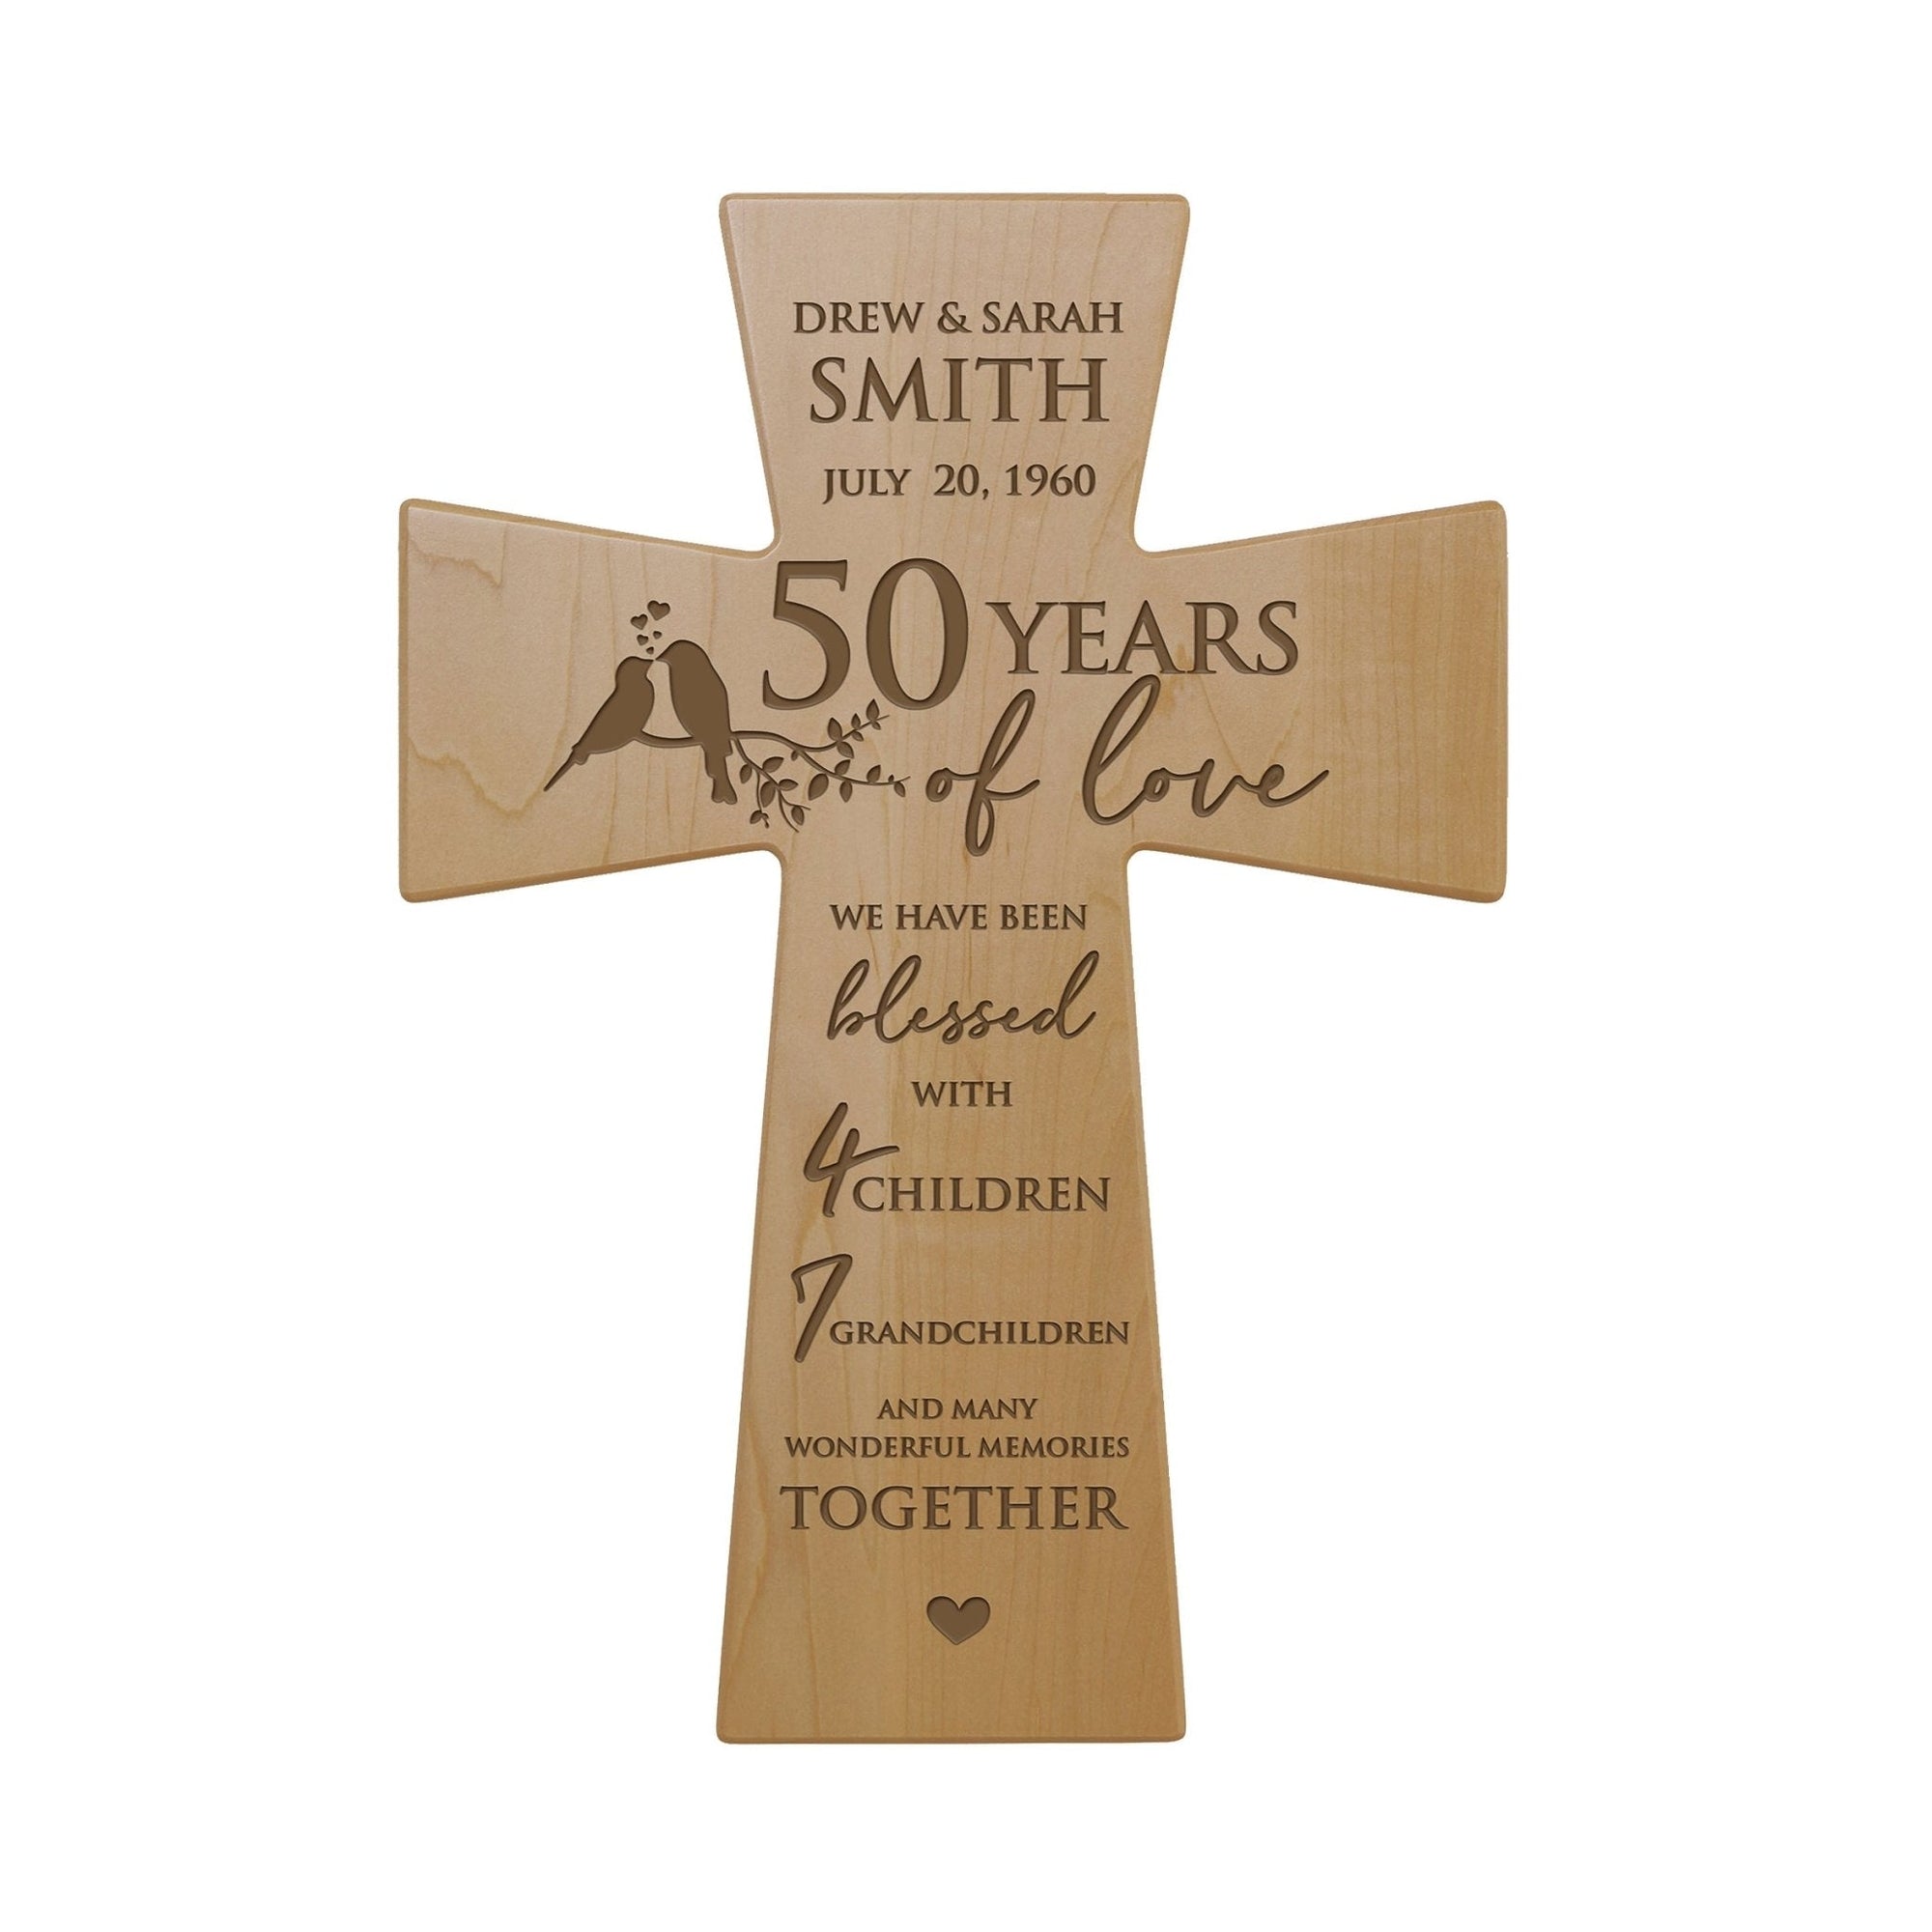 Lifesong Milestones Personalized 50th wedding wall cross – A symbol of enduring love and a perfect anniversary gift for the couple.